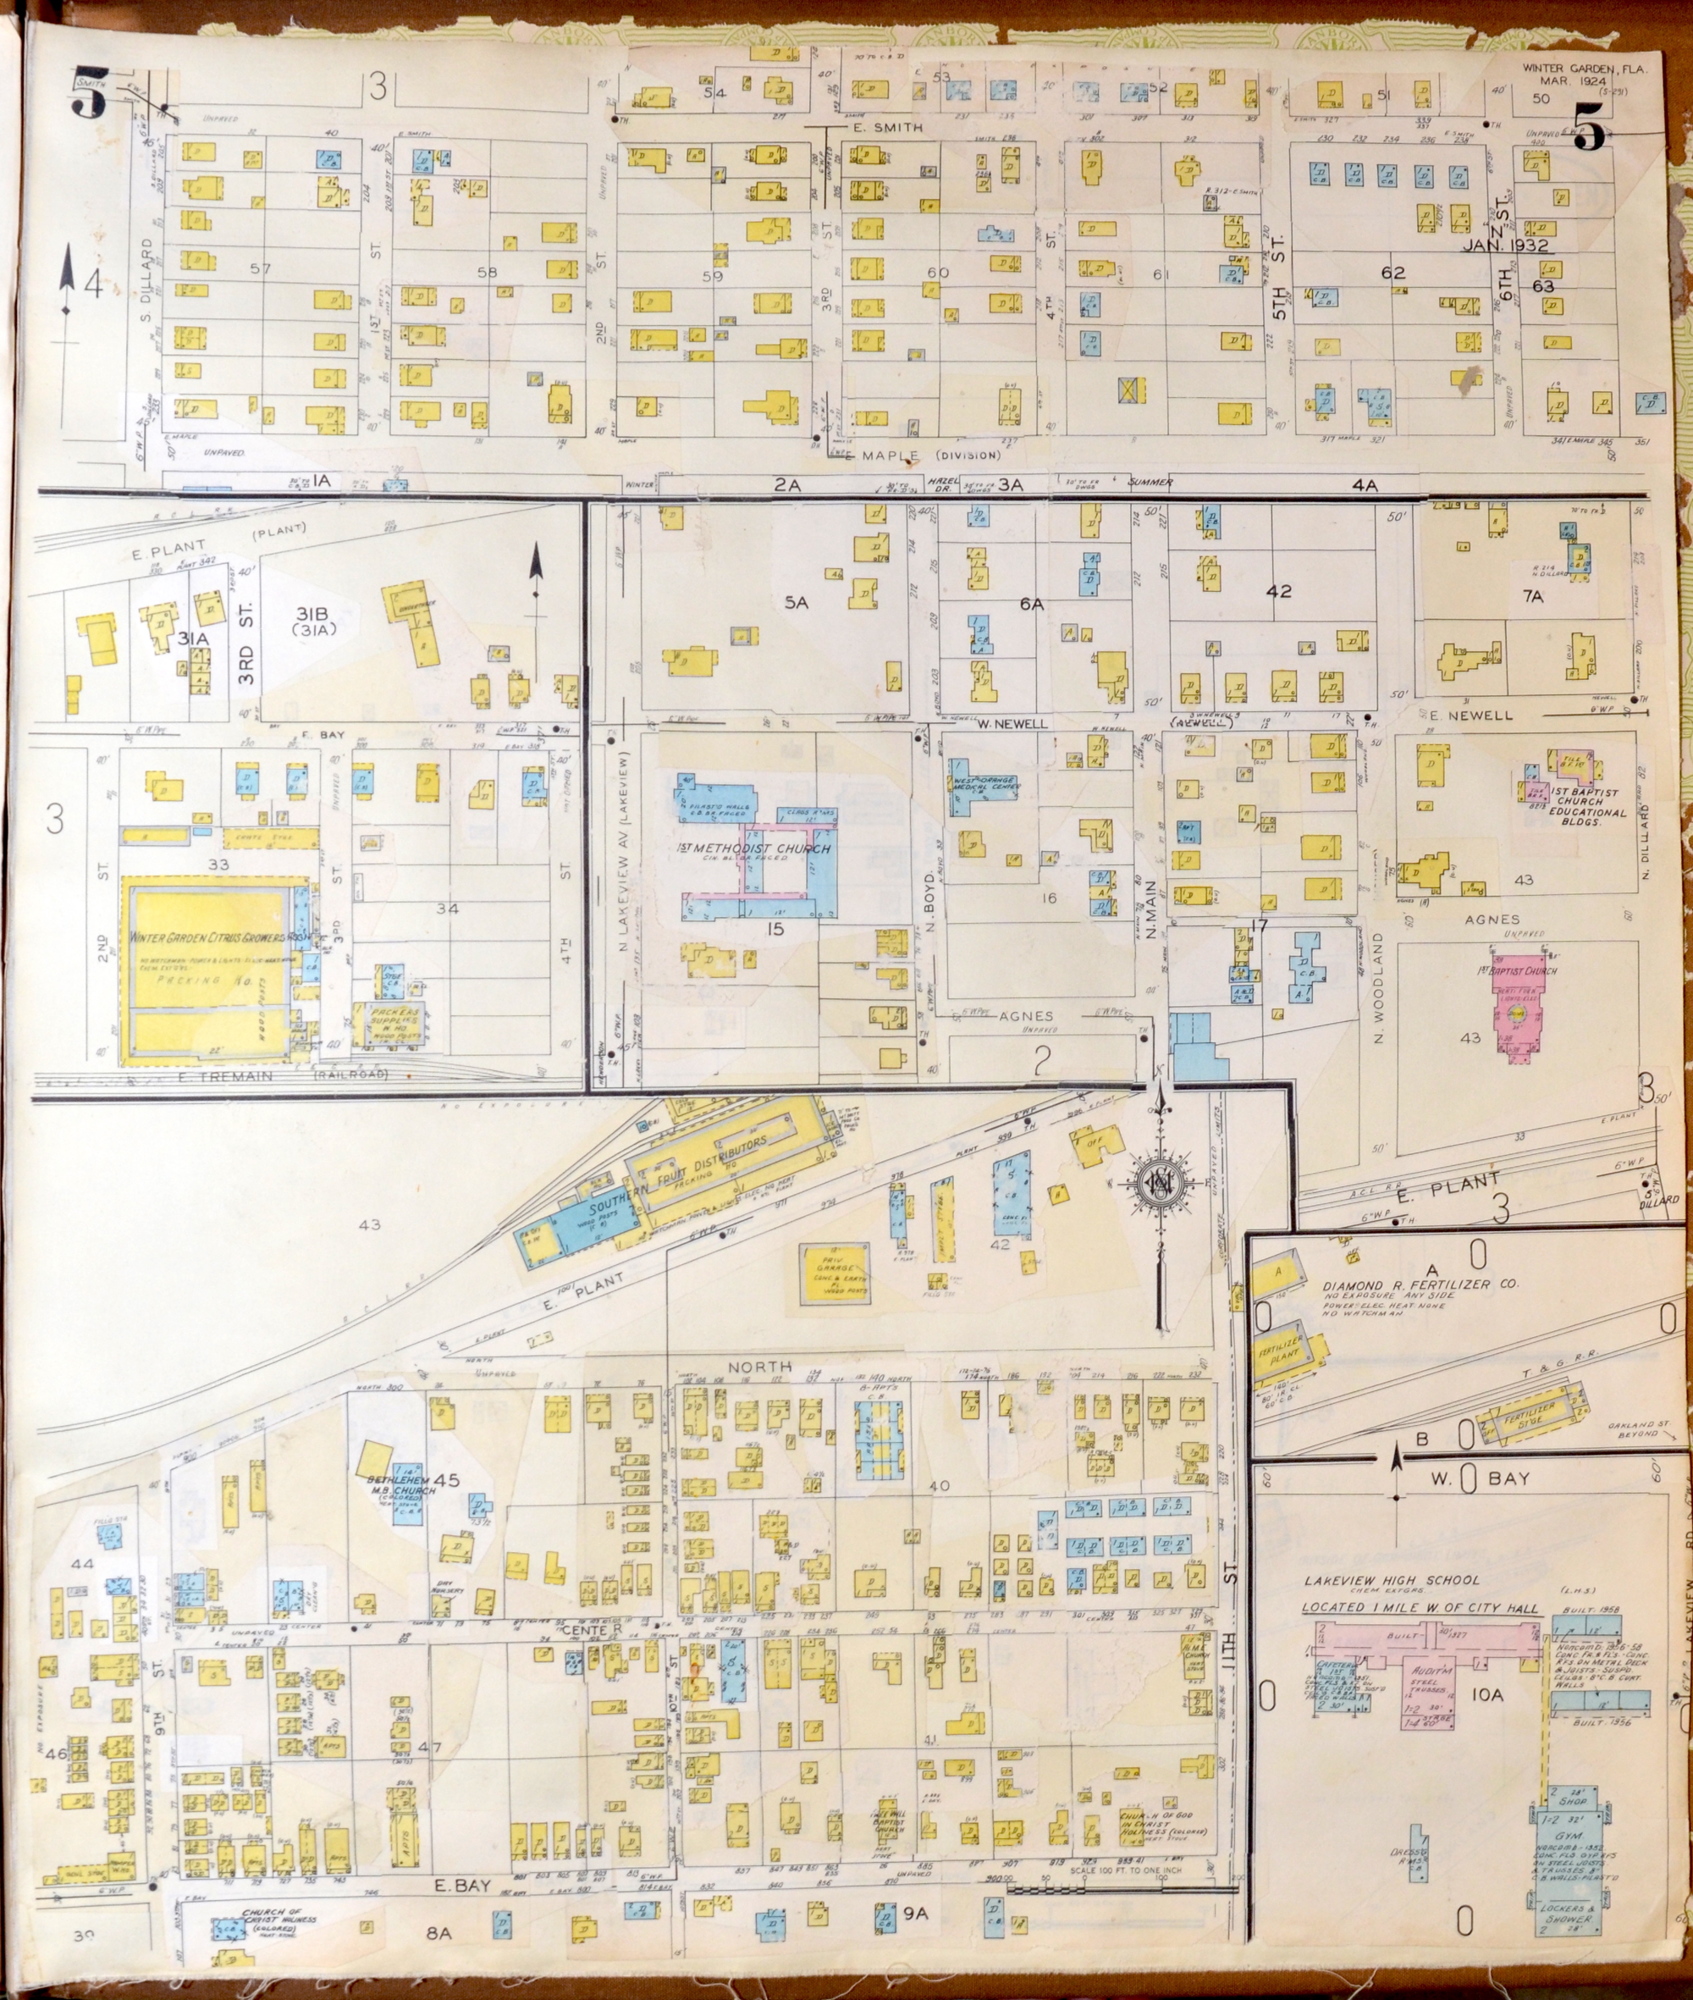 The Sanborn Water and Fire Maps of Winter Garden and Tildenville, dated 1924. The maps are layered with updated graphics literally pasted on through the 1950s.